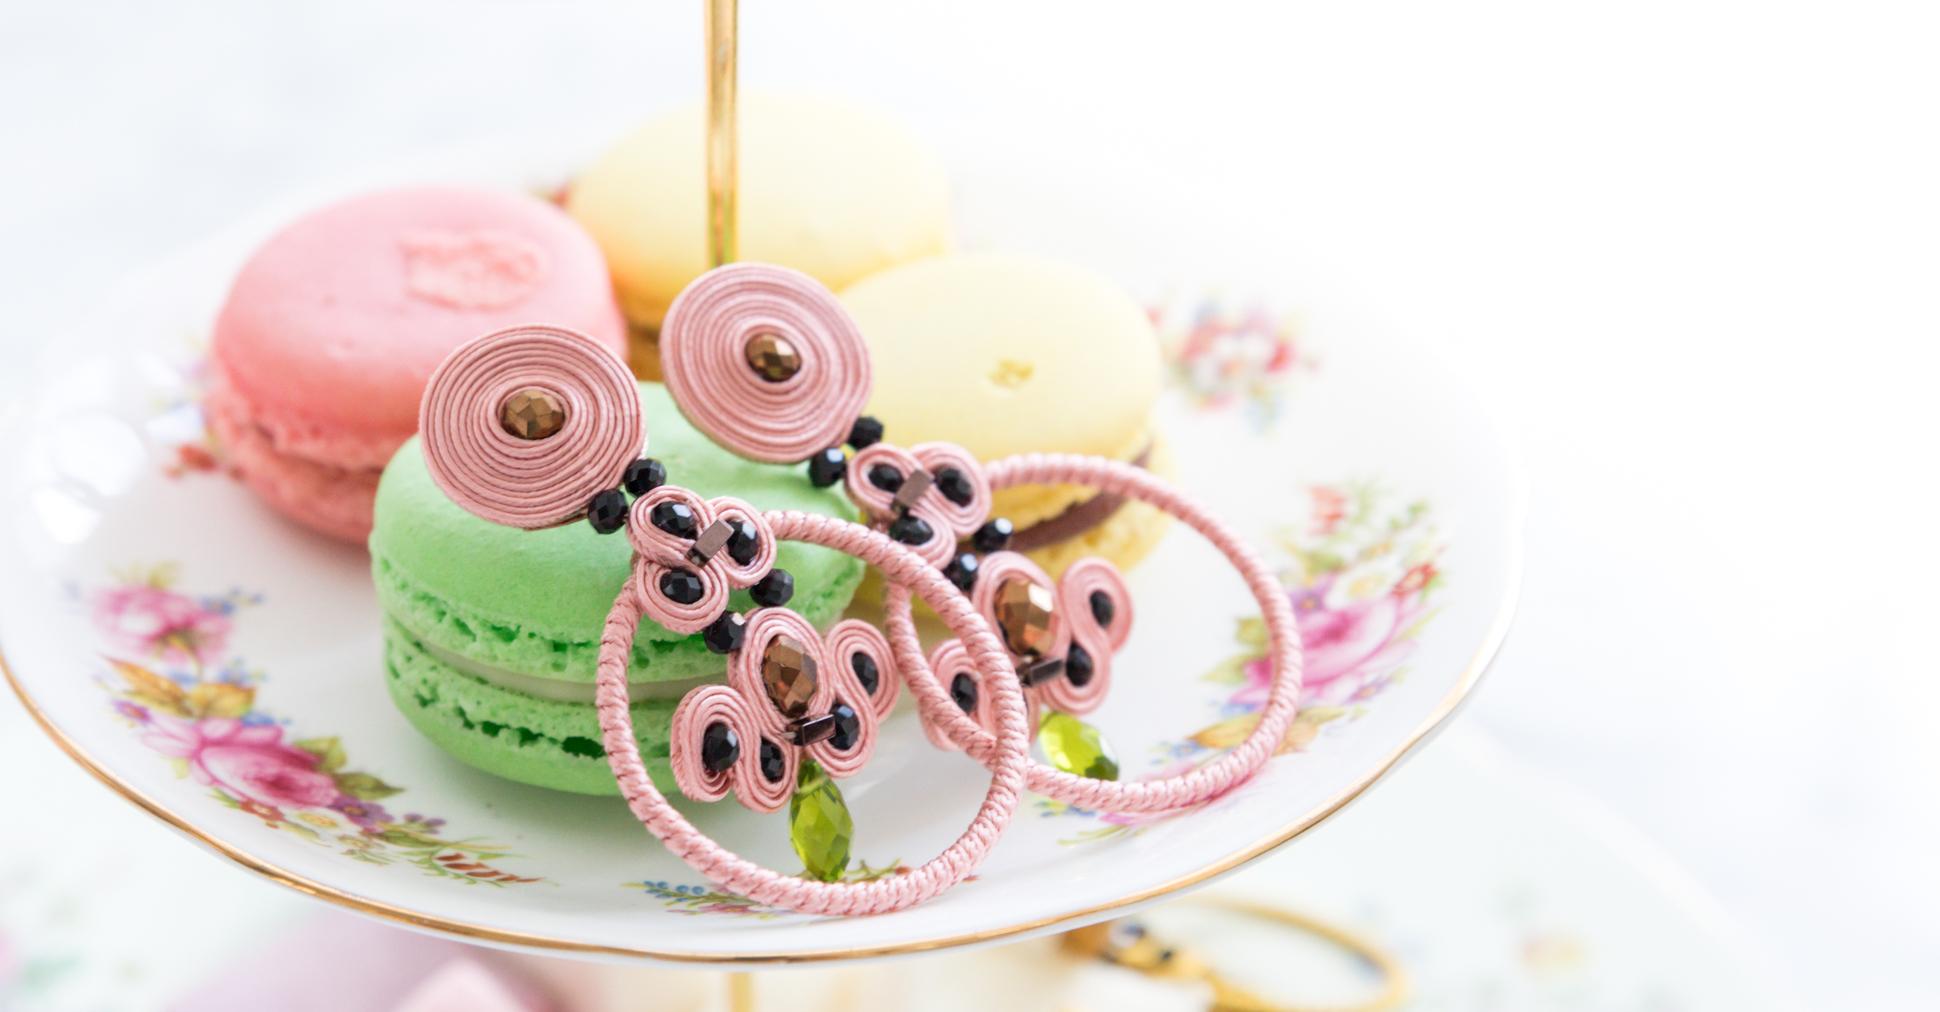 Musula La Patisserie Macarons Pistache Earrings
La Patisserie Collection is a special homage to sweet lovers
Musula in the Fall collection 2021 wants  to pay tribute to the sweet and delicate Pastry world. Pastries have been always a must at our